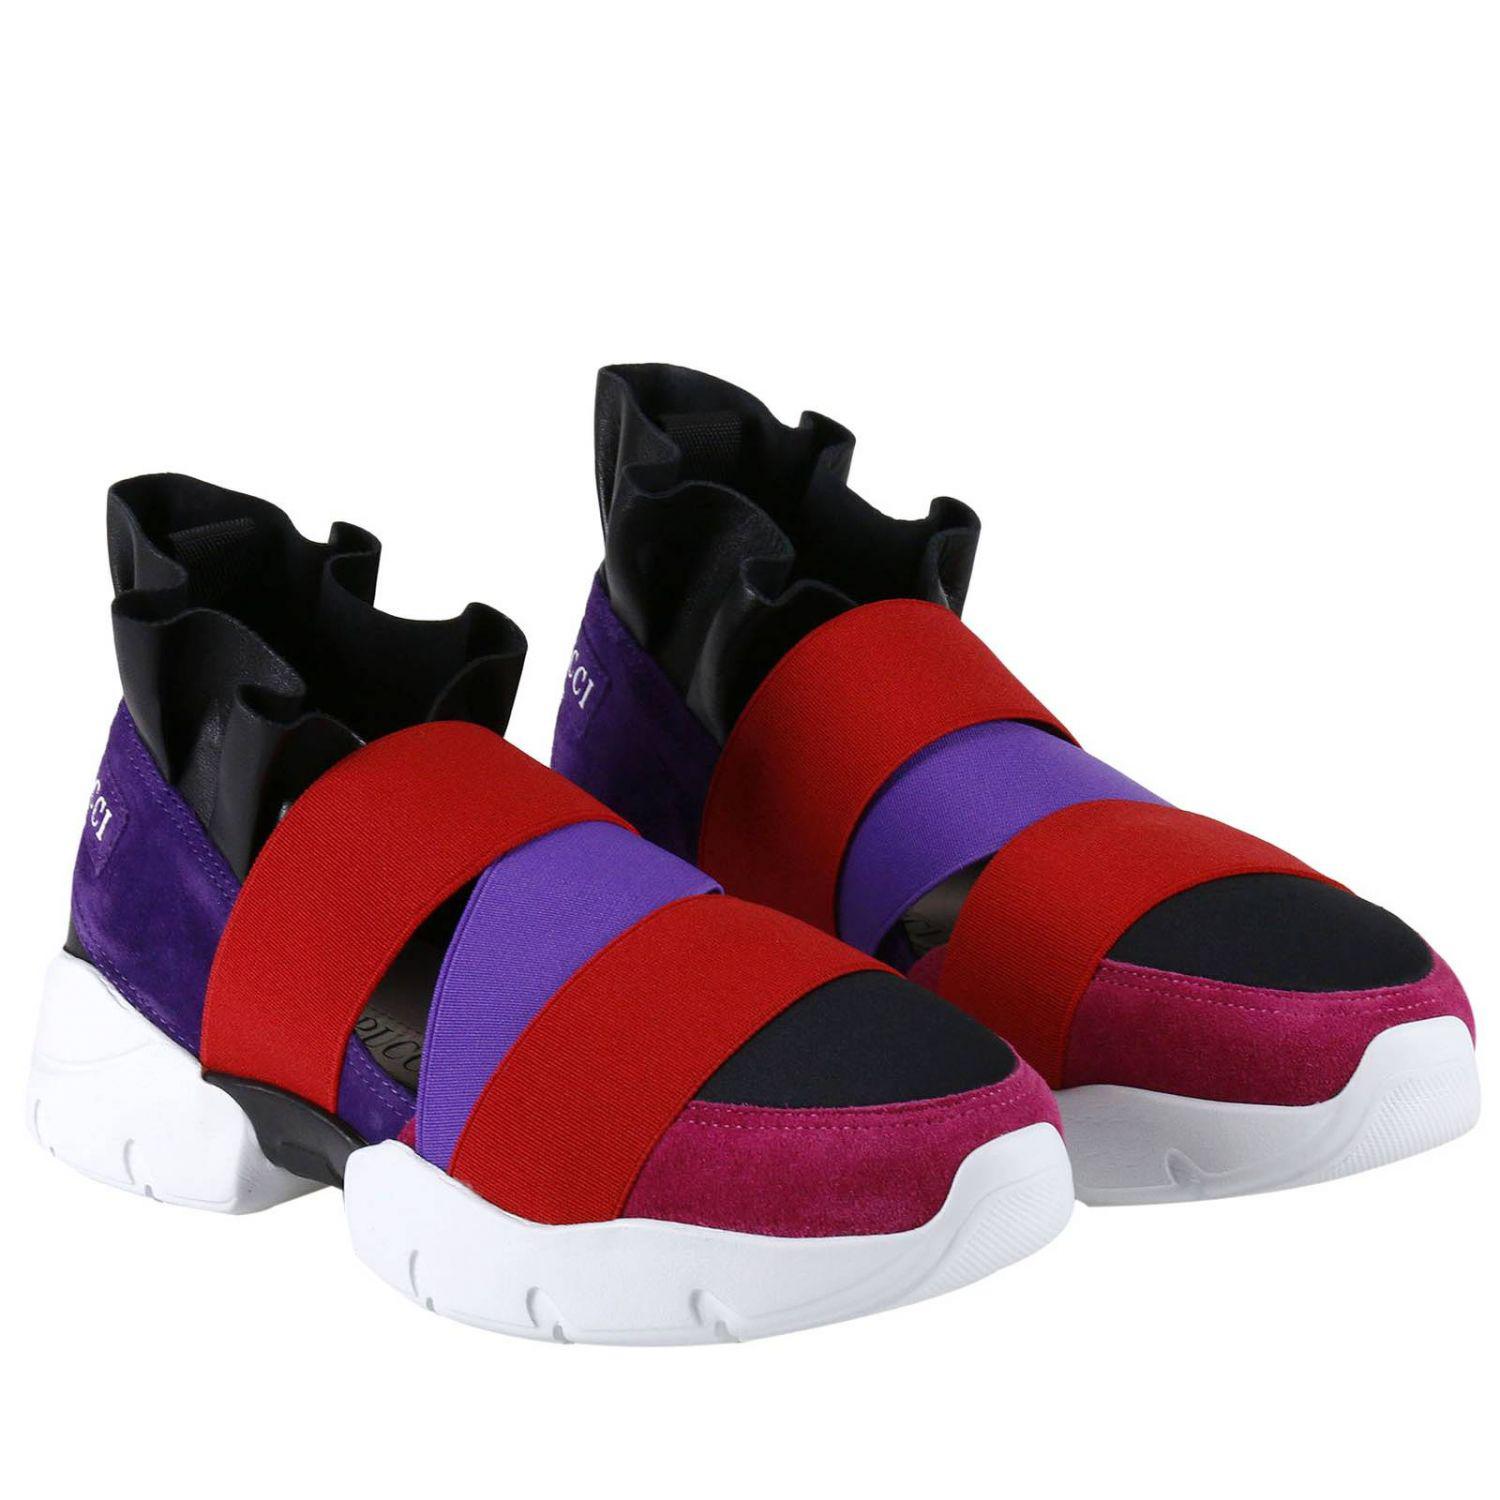 Lyst - Emilio Pucci Sneakers Shoes Women in Red